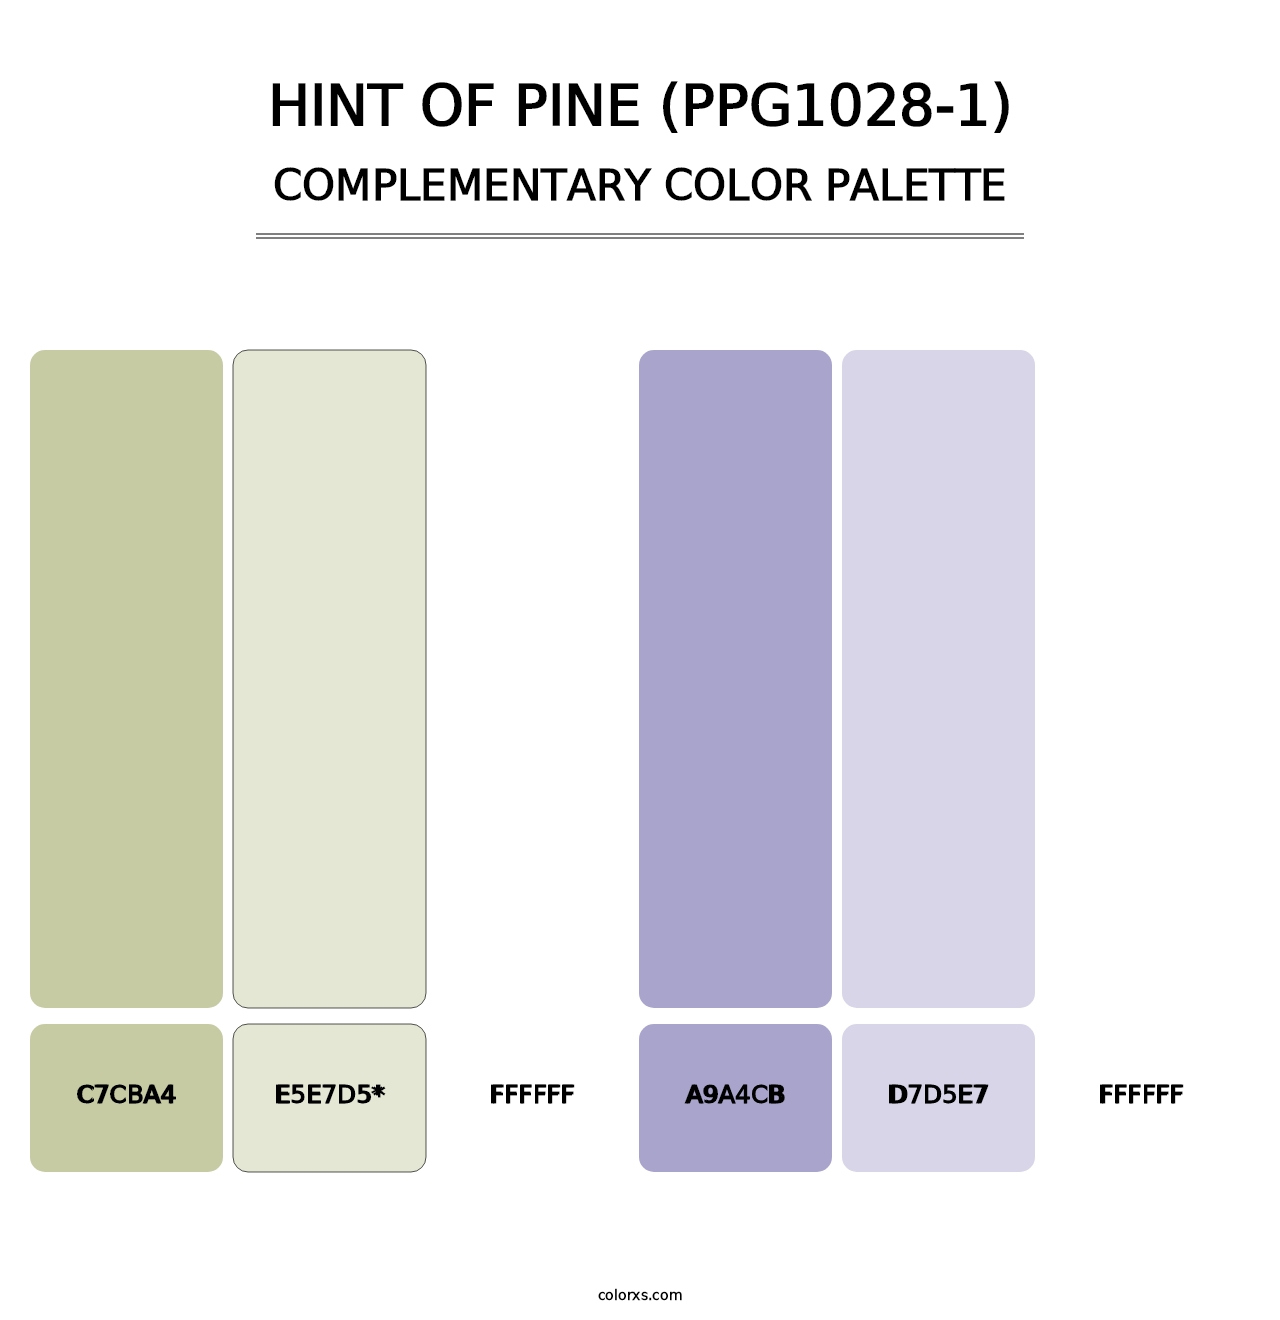 Hint Of Pine (PPG1028-1) - Complementary Color Palette